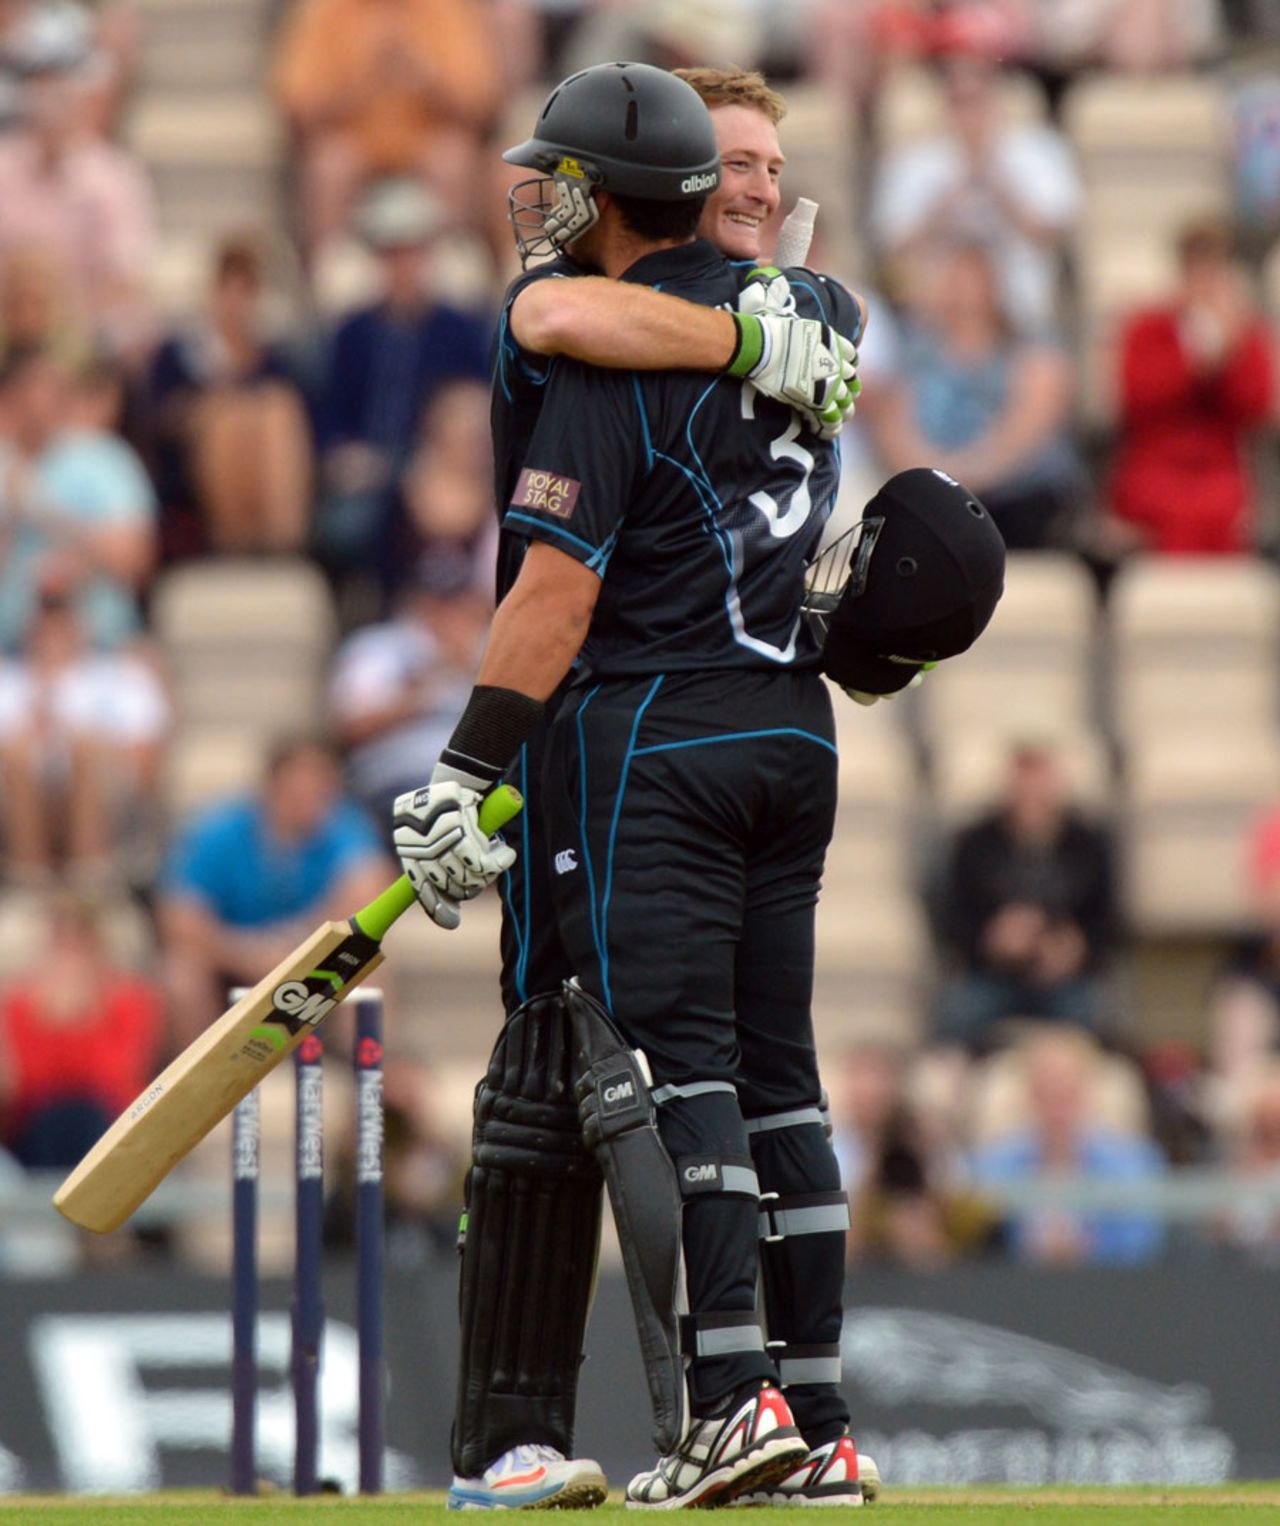 Martin Guptill was involved in another big partnership with Ross Taylor, England v New Zealand, 2nd ODI, Ageas Bowl, June 2, 2013